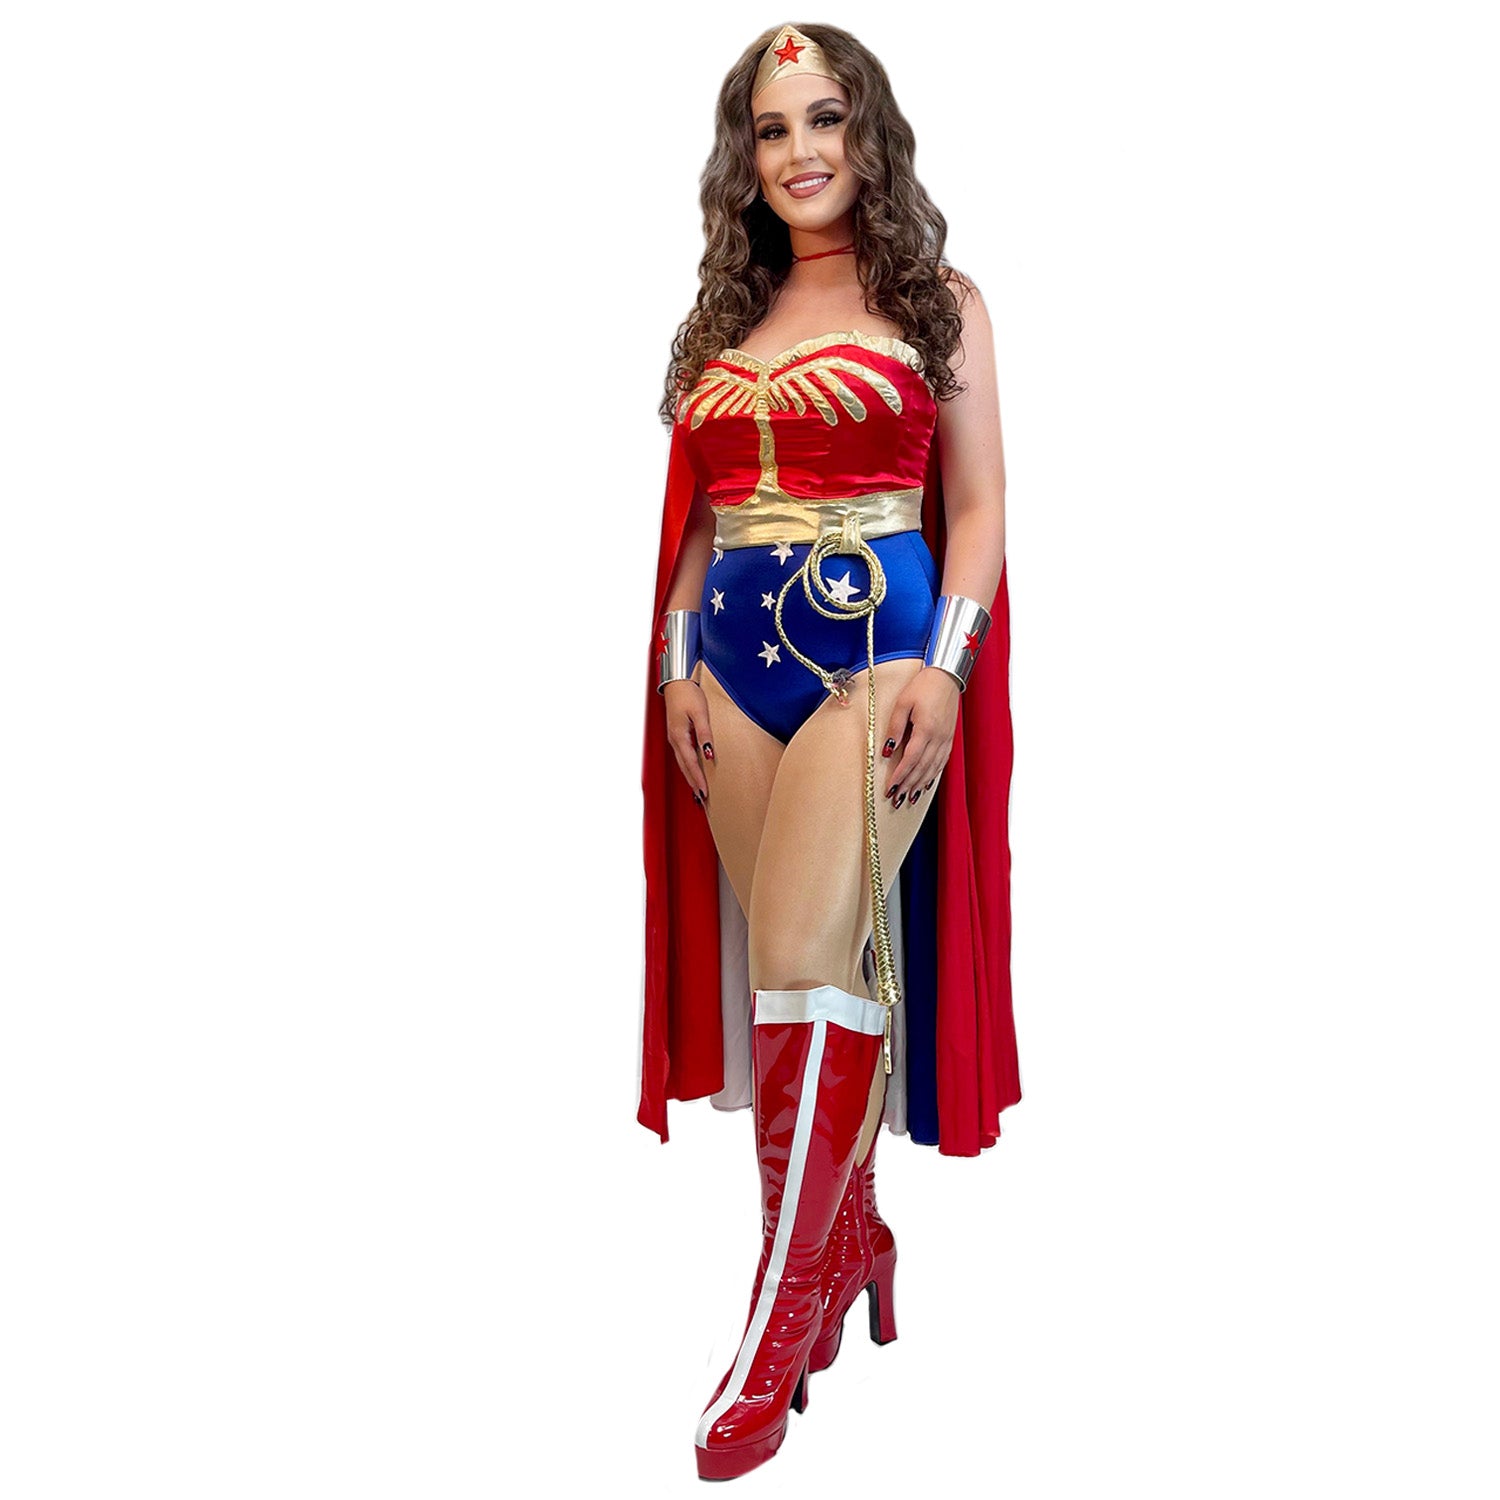 Wonder Woman Inspired Costume w/ Cape, Gold Crown, Lasso, and Cuffs